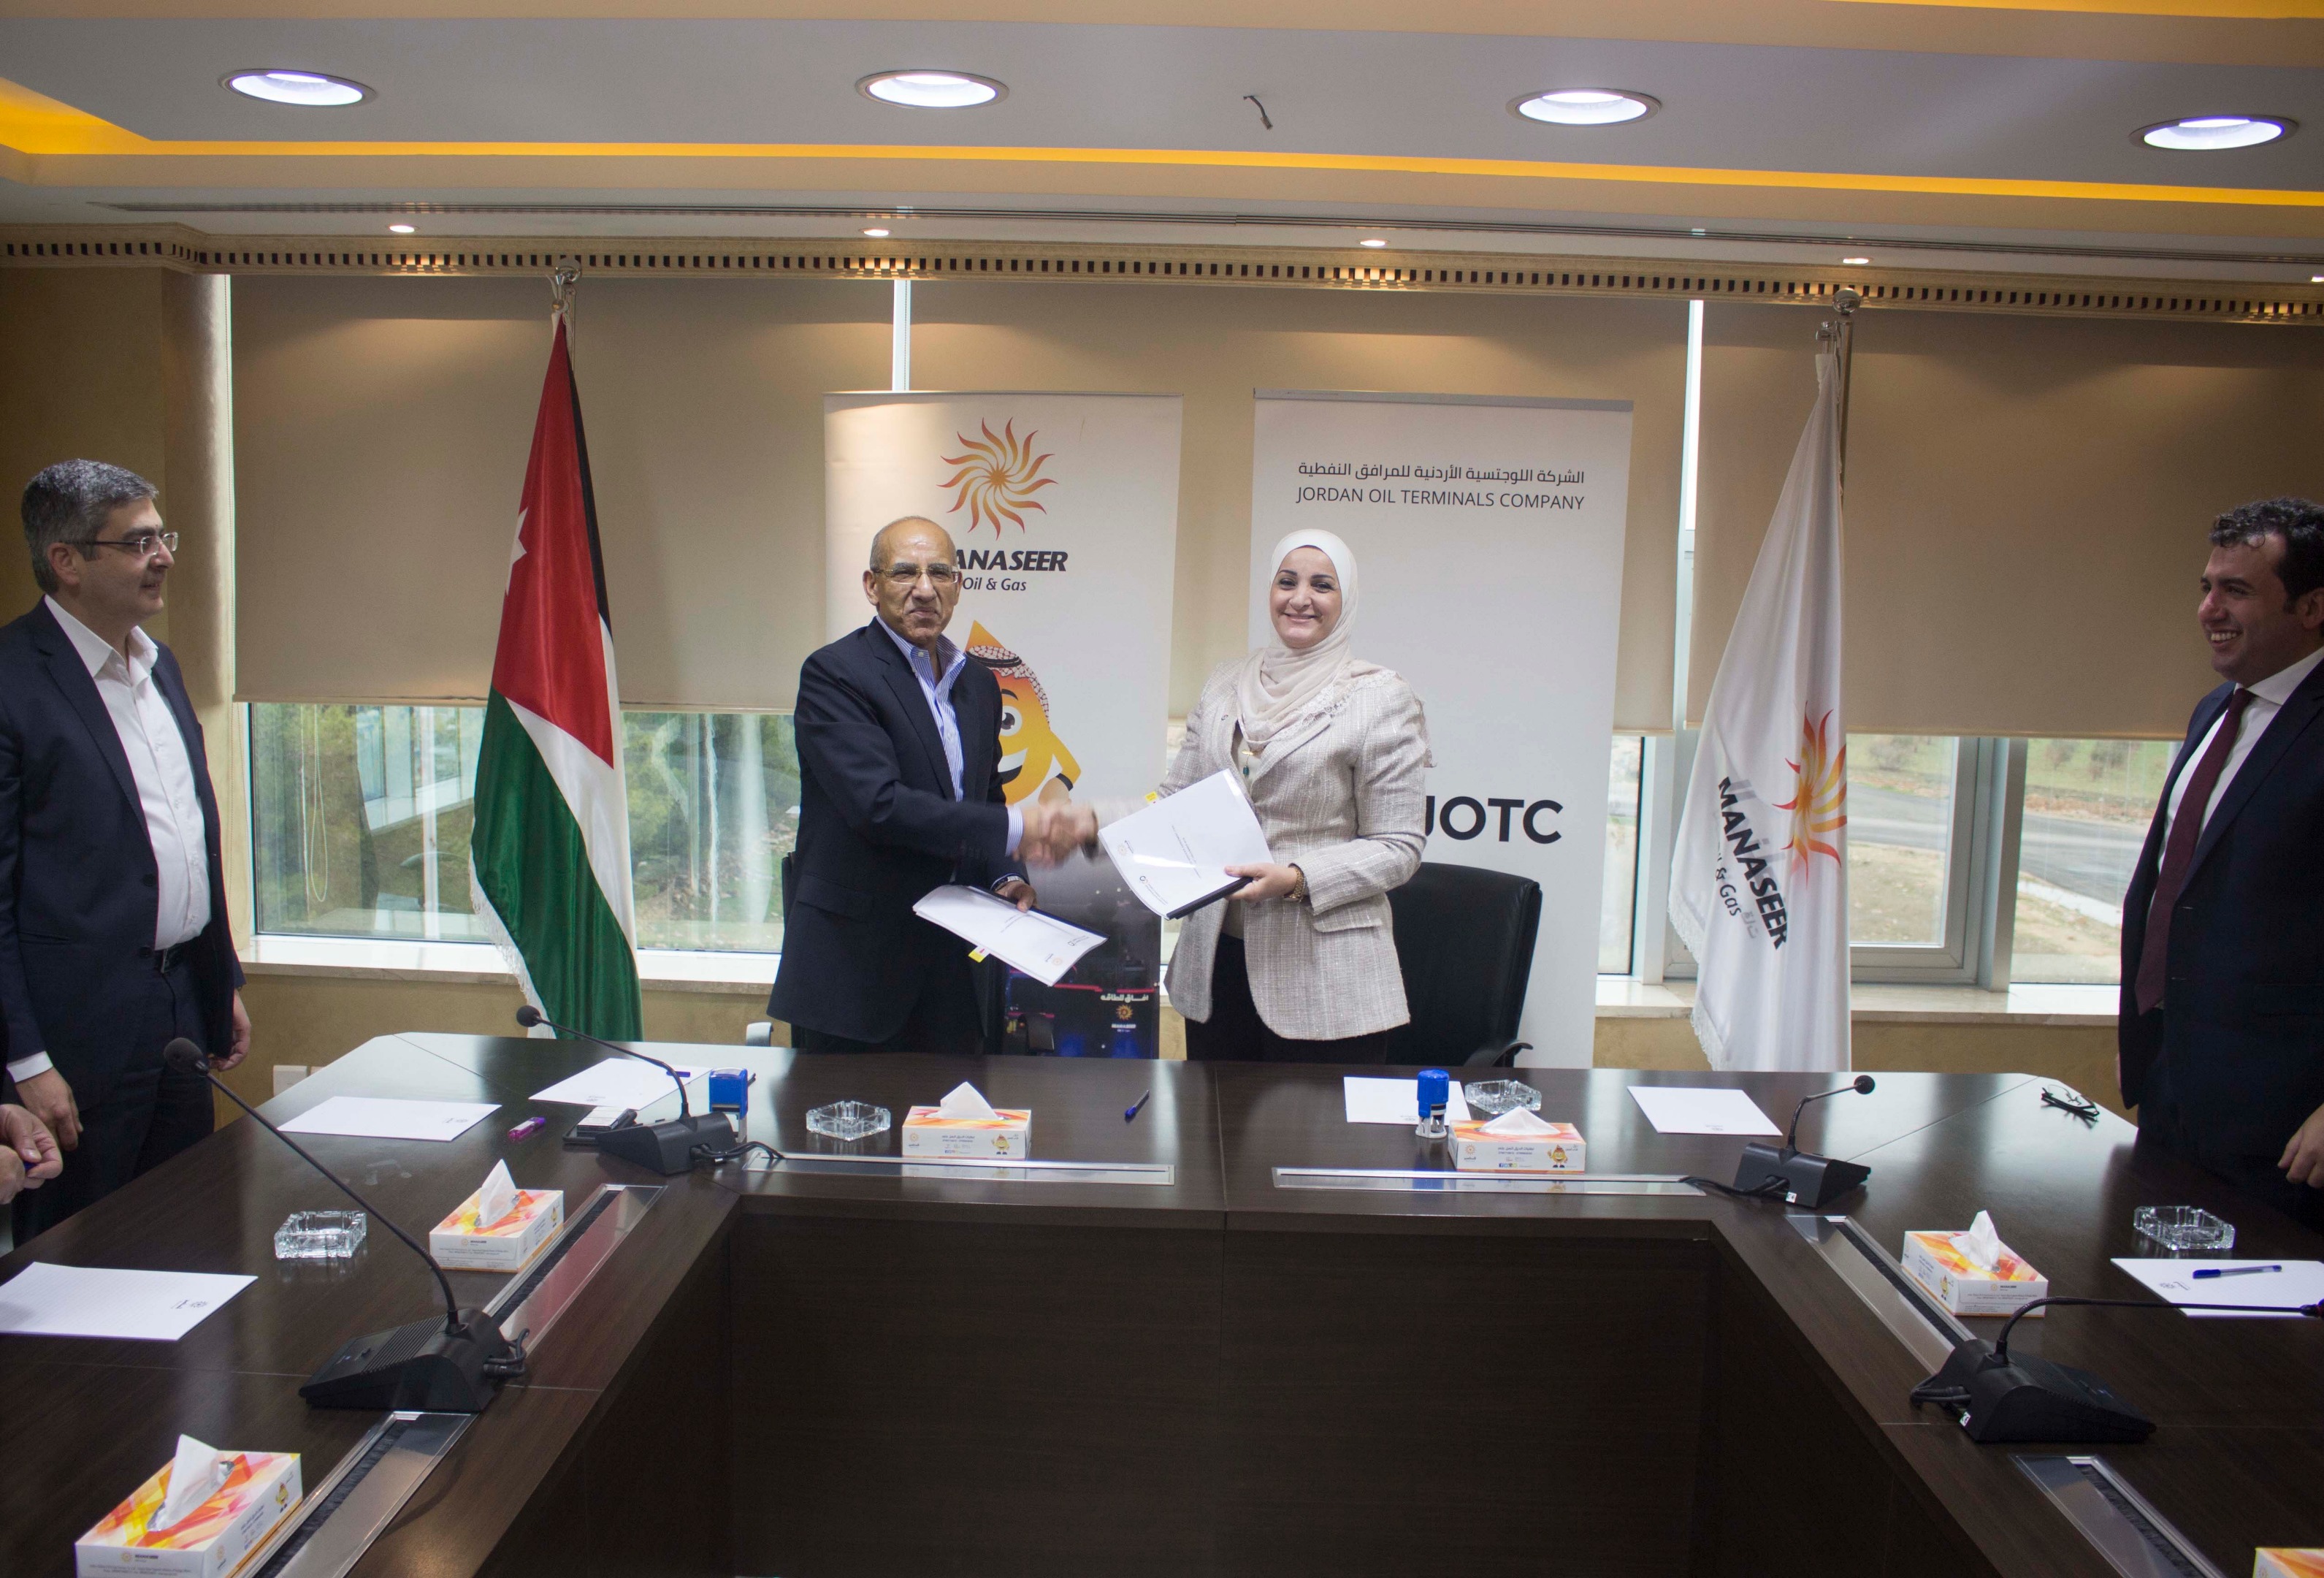 Manaseer Oil & Gas Signs Service Agreement with Jordan Oil Terminals Company